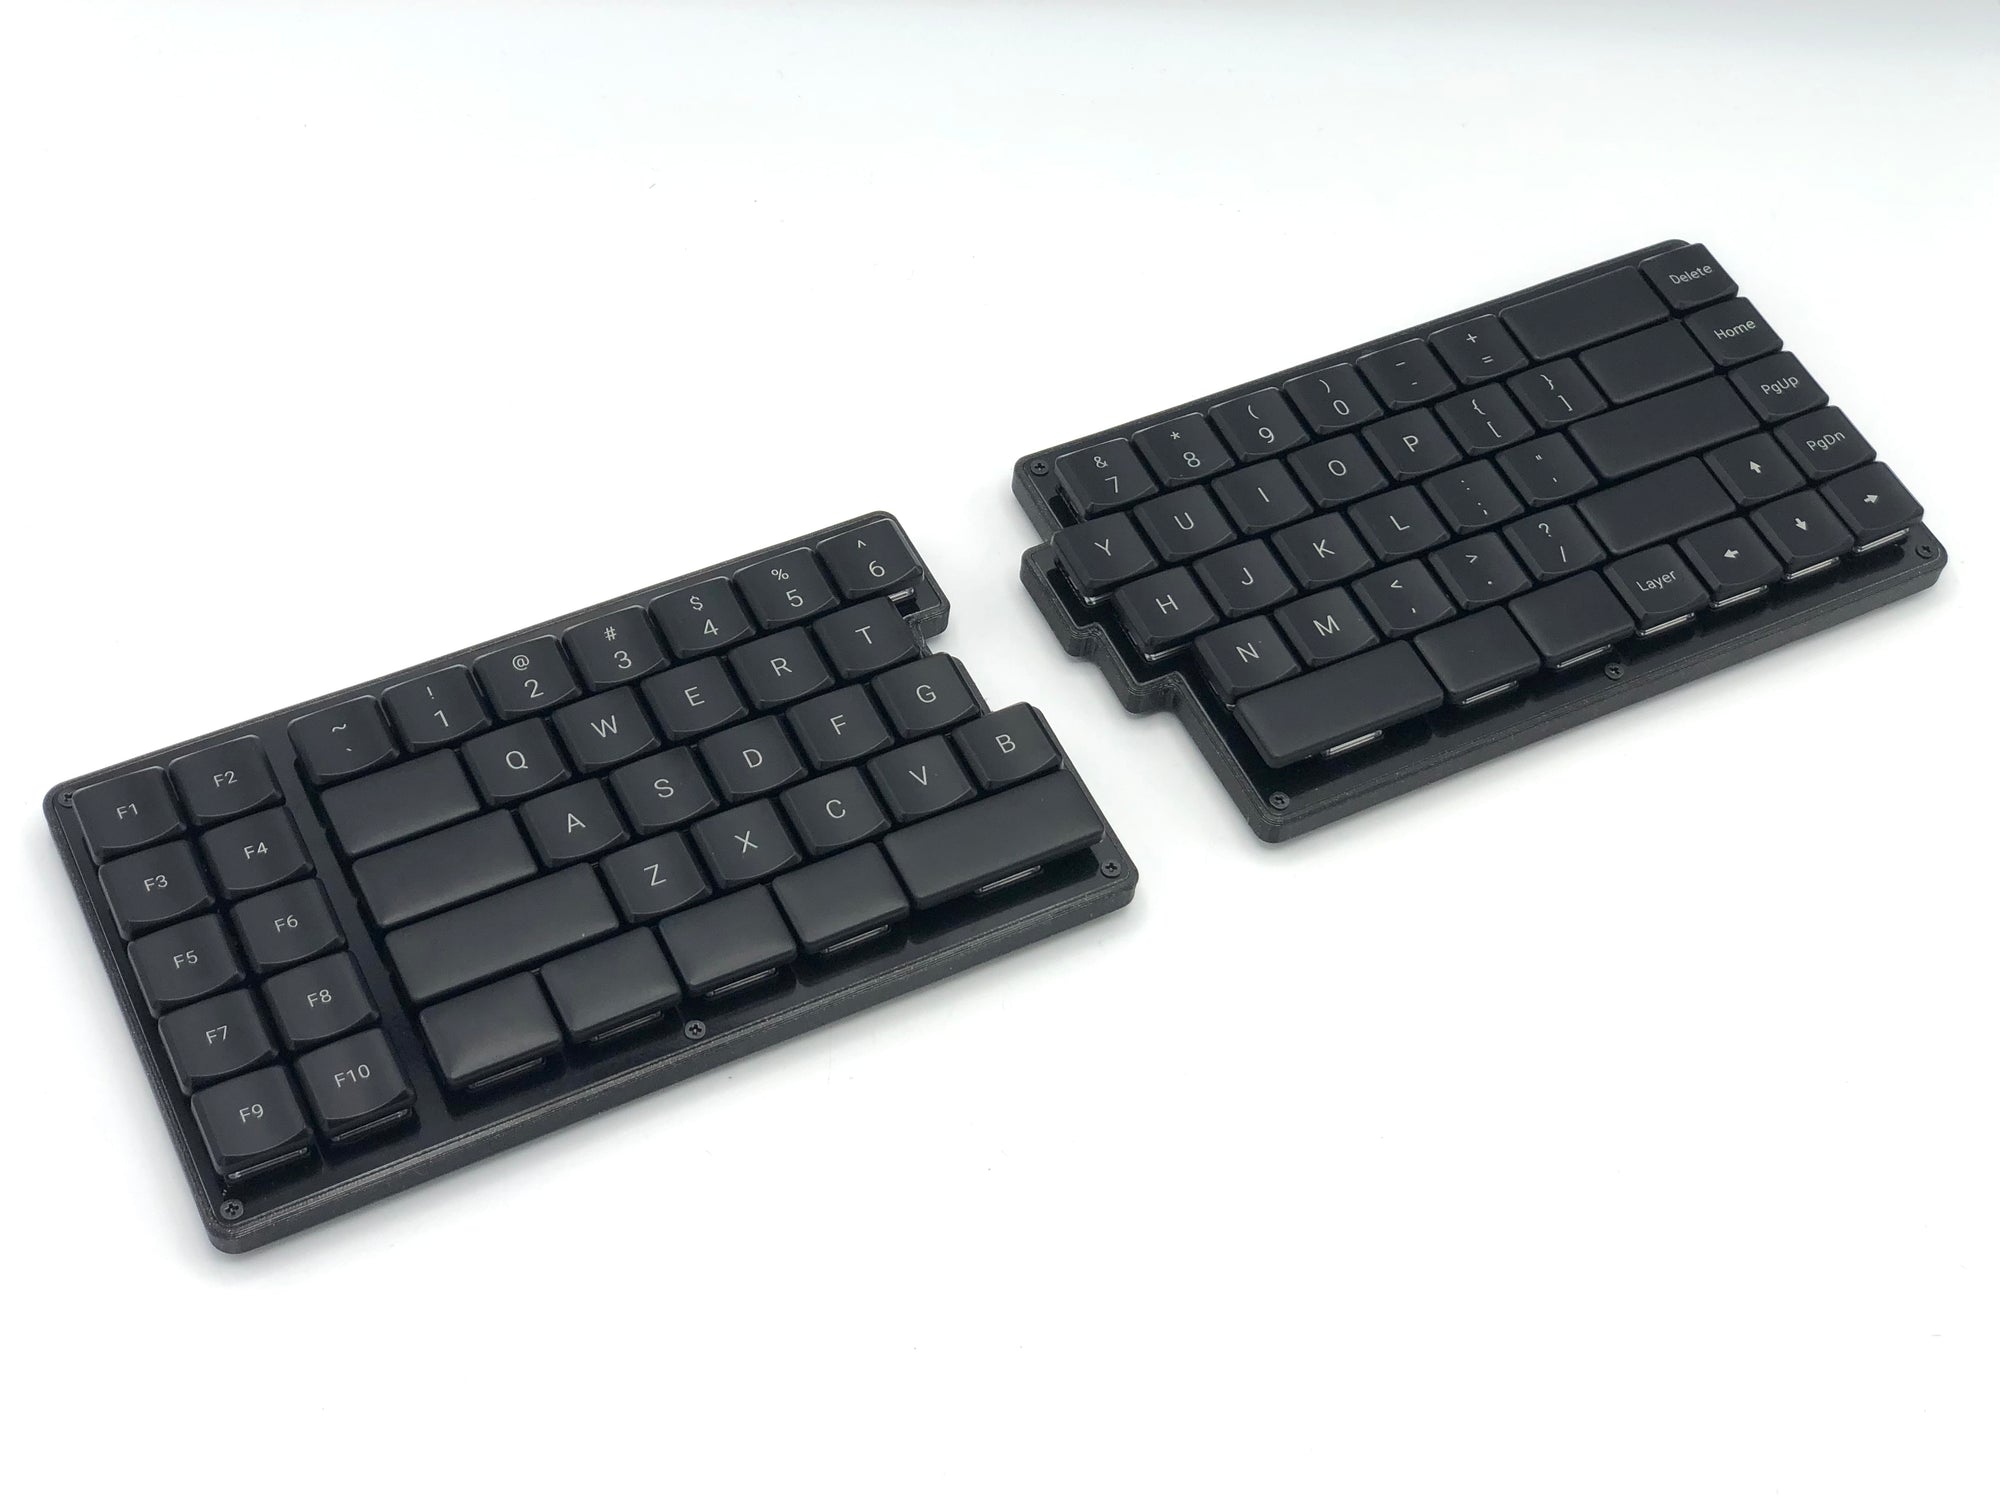 Fully built Cepstrum keyboard with black keycaps and a black 3D printed middle layer.